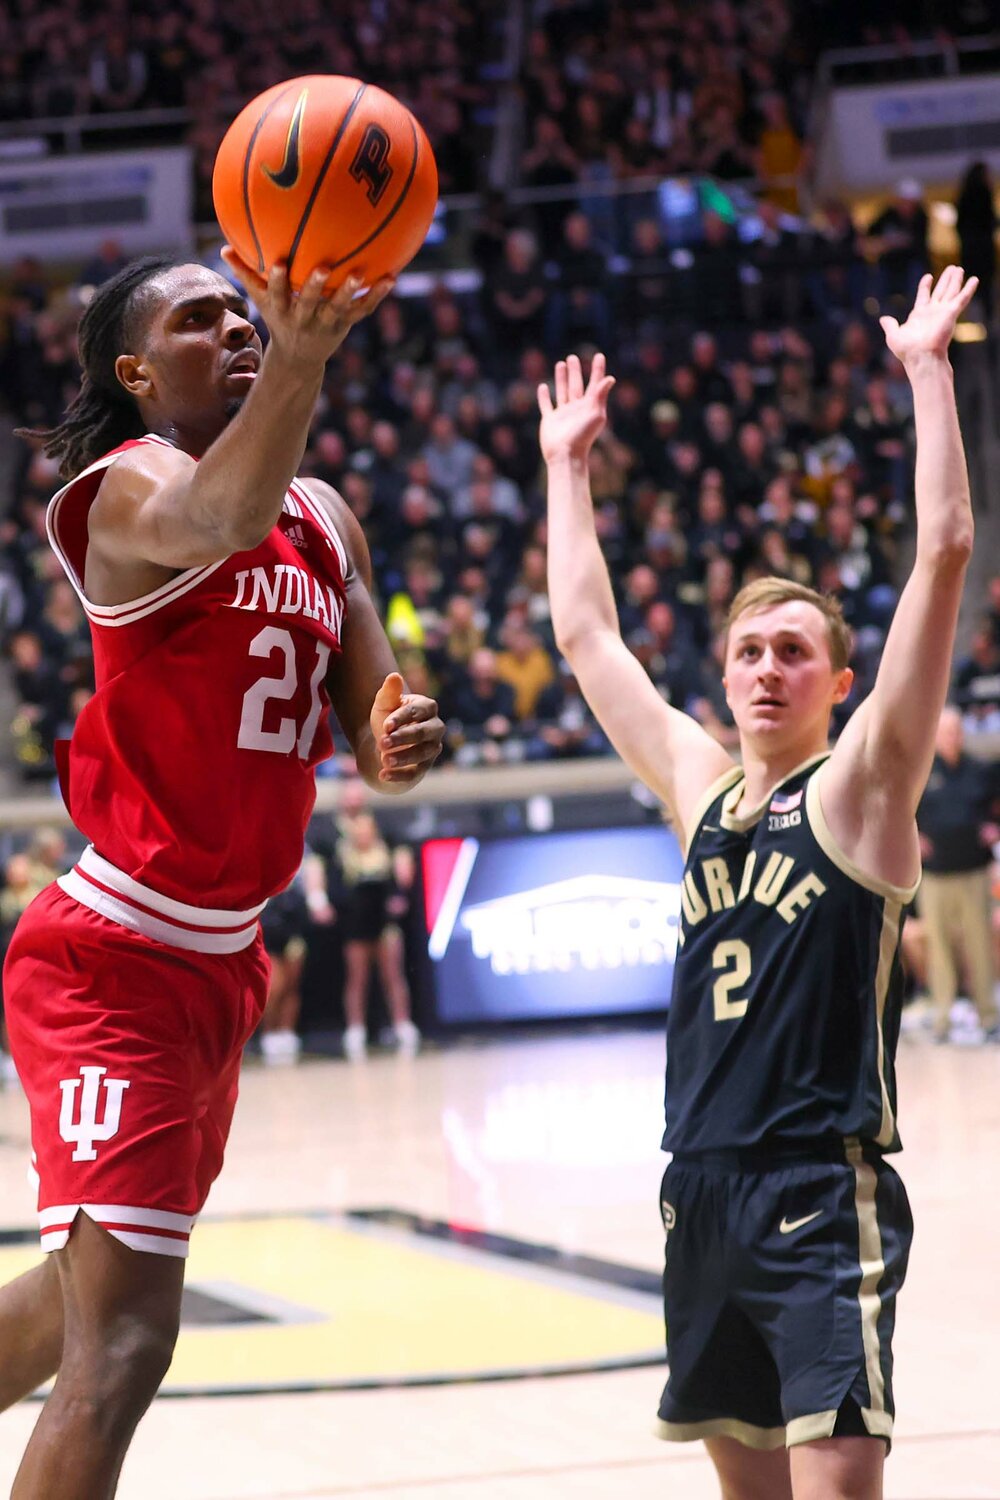 Mackenzie Mgbako of Indiana - scooping a lay-up late in the game as Fletcher Loyer of Purdue gets out of the way